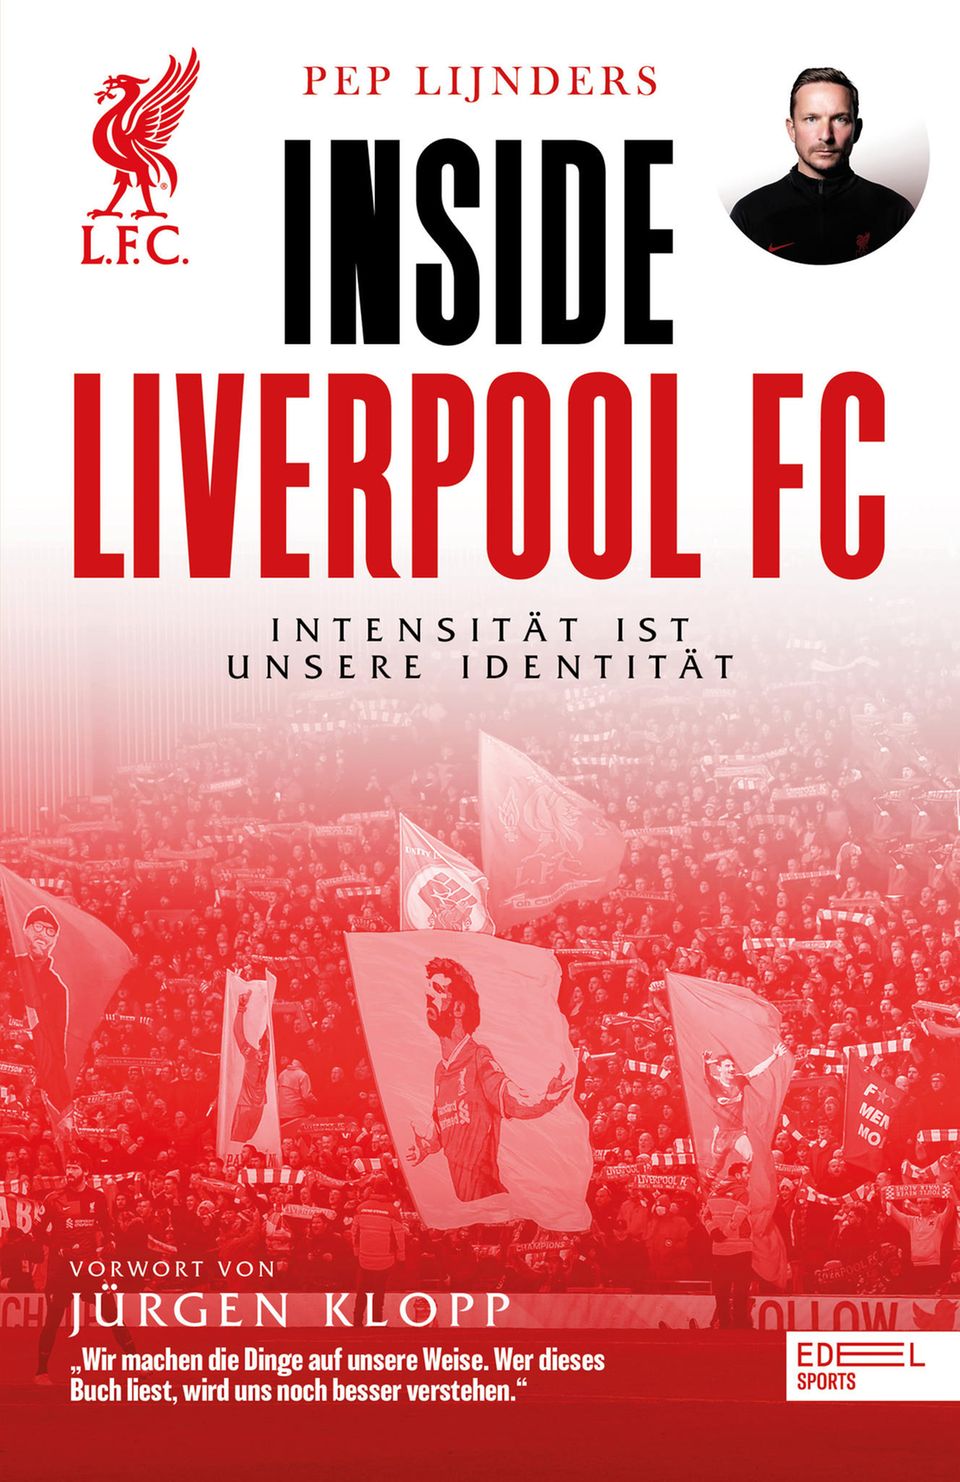 Pep Lijnders  "Inside Liverpool FC: Intensity is our identity"  384 pages Edel Sports 19.95 euros